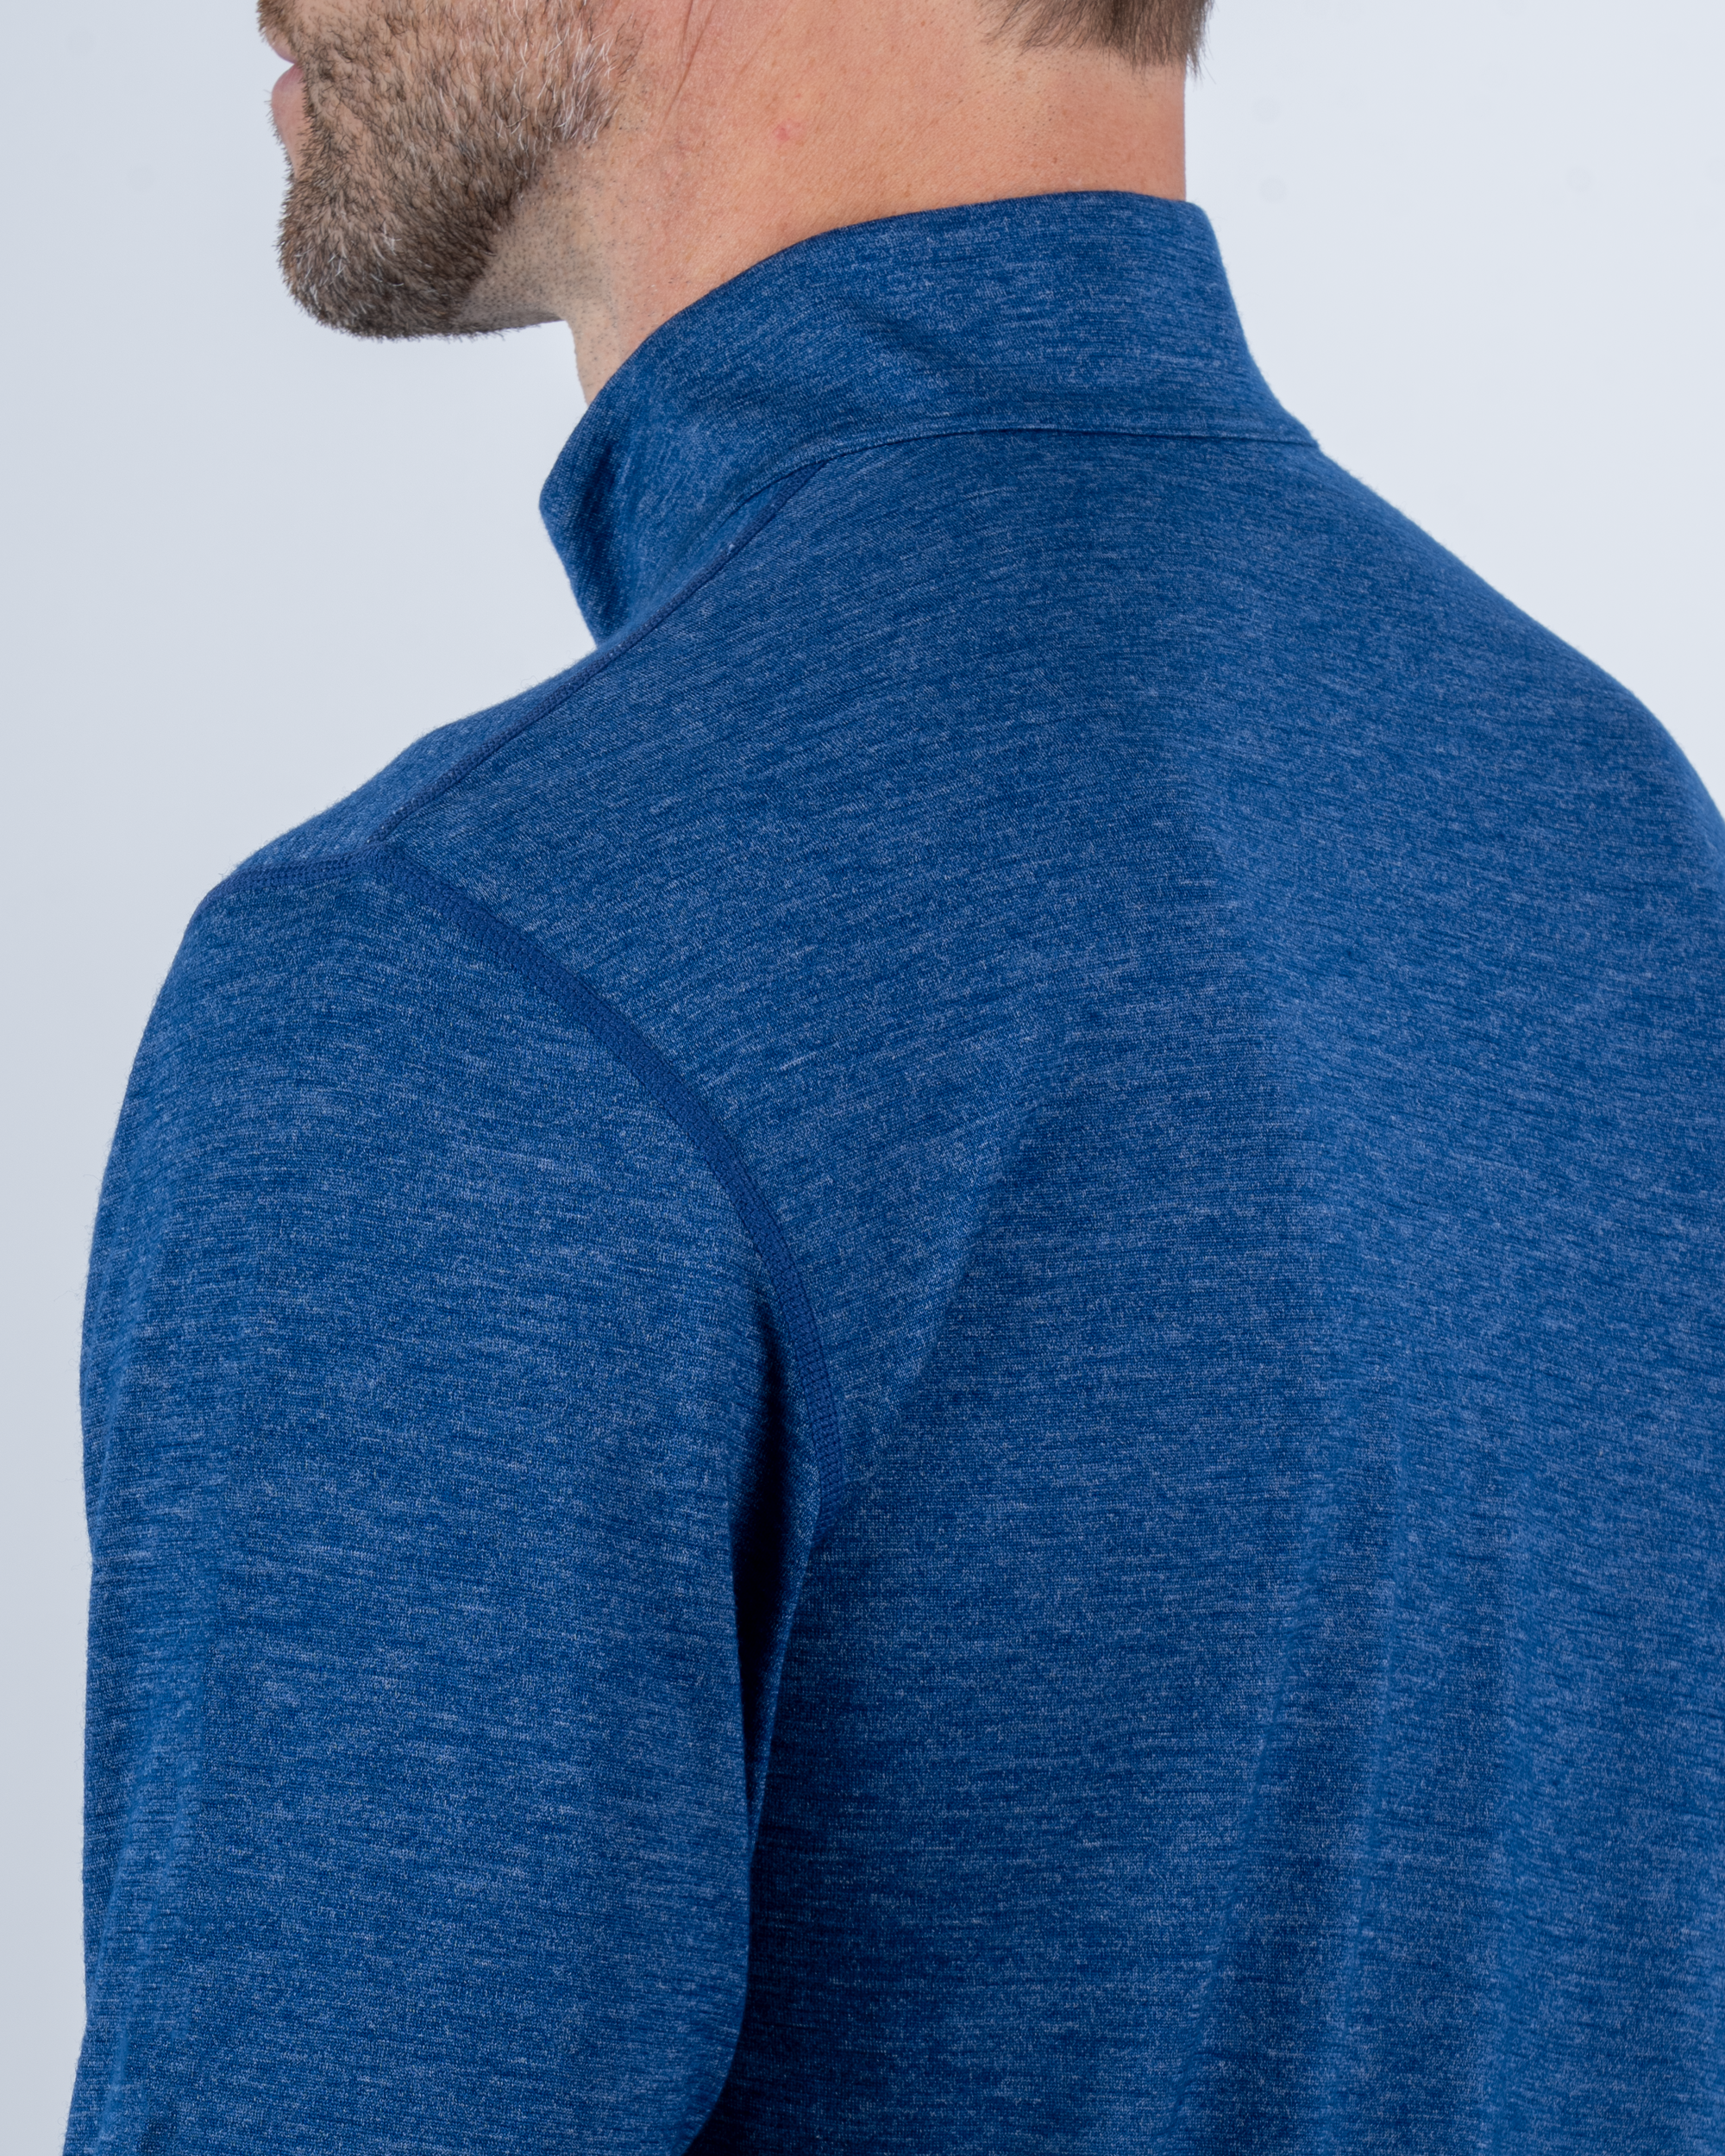 Foreign Rider Co Nuyarn Merino Wool Blue Heather Quarter Zip Sweater Back Shoulder and Neck Detail